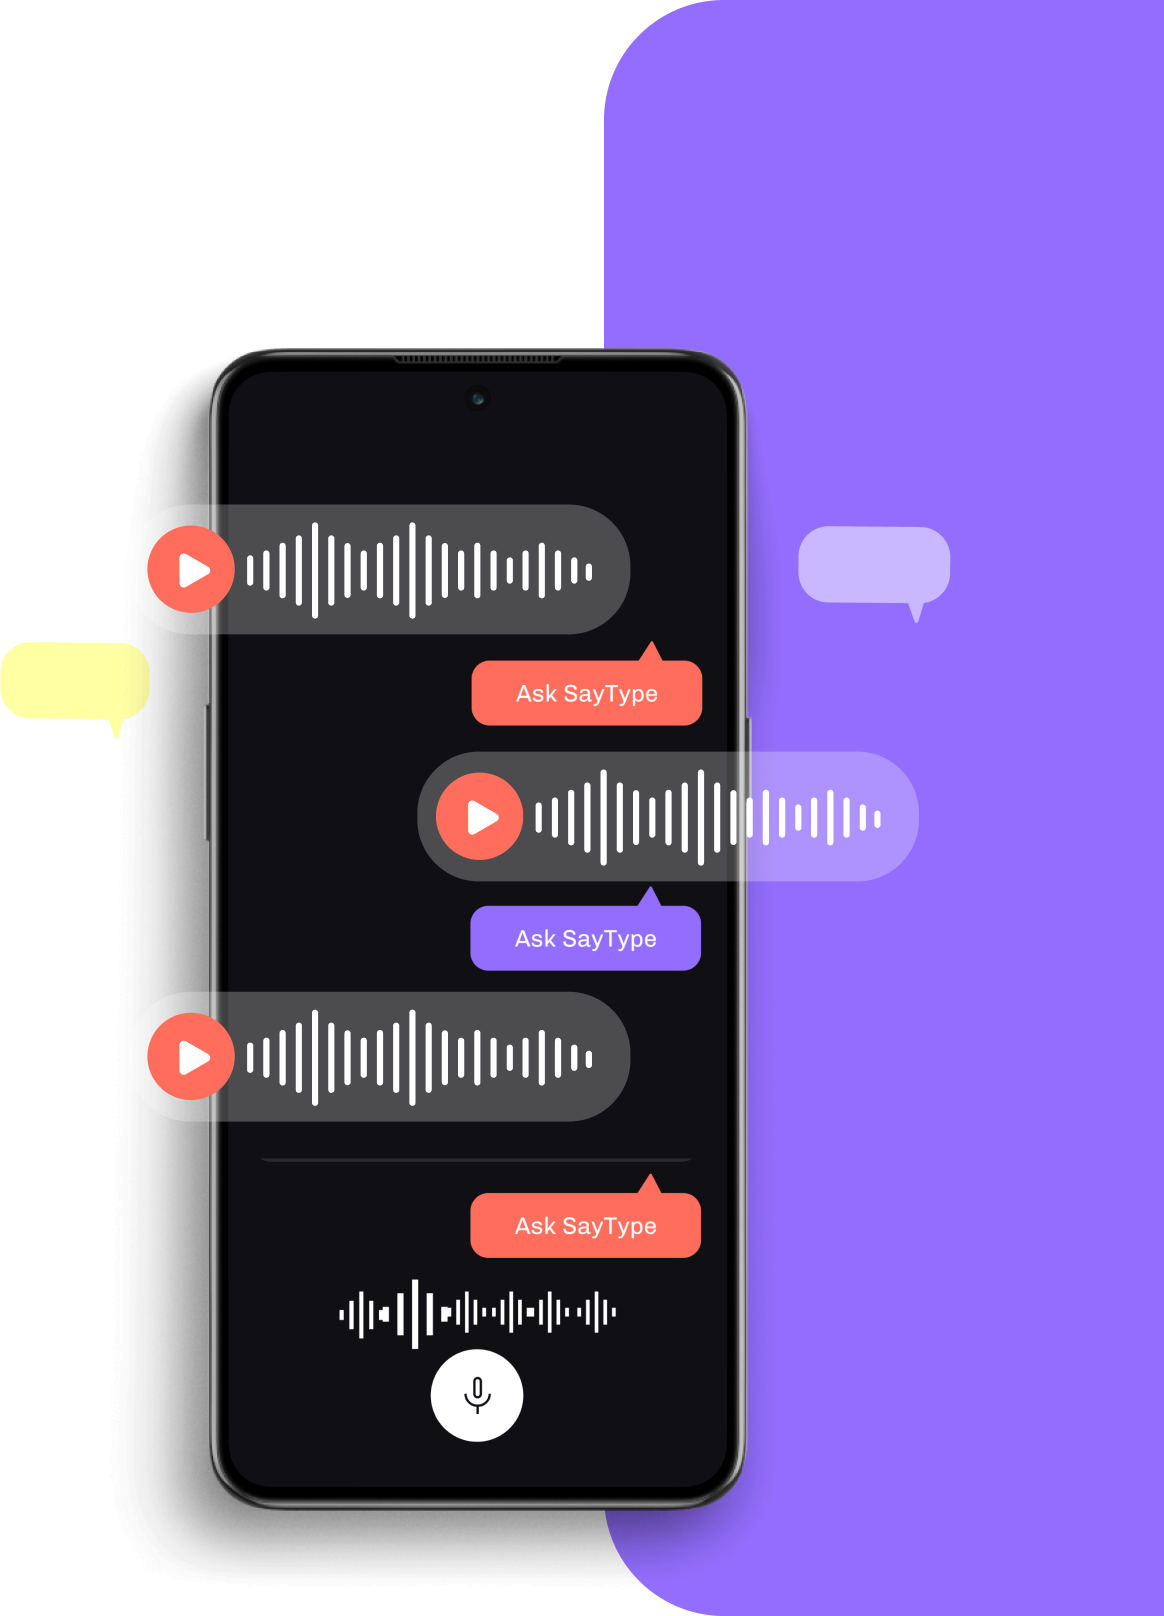 Your Voice, Your Assistant